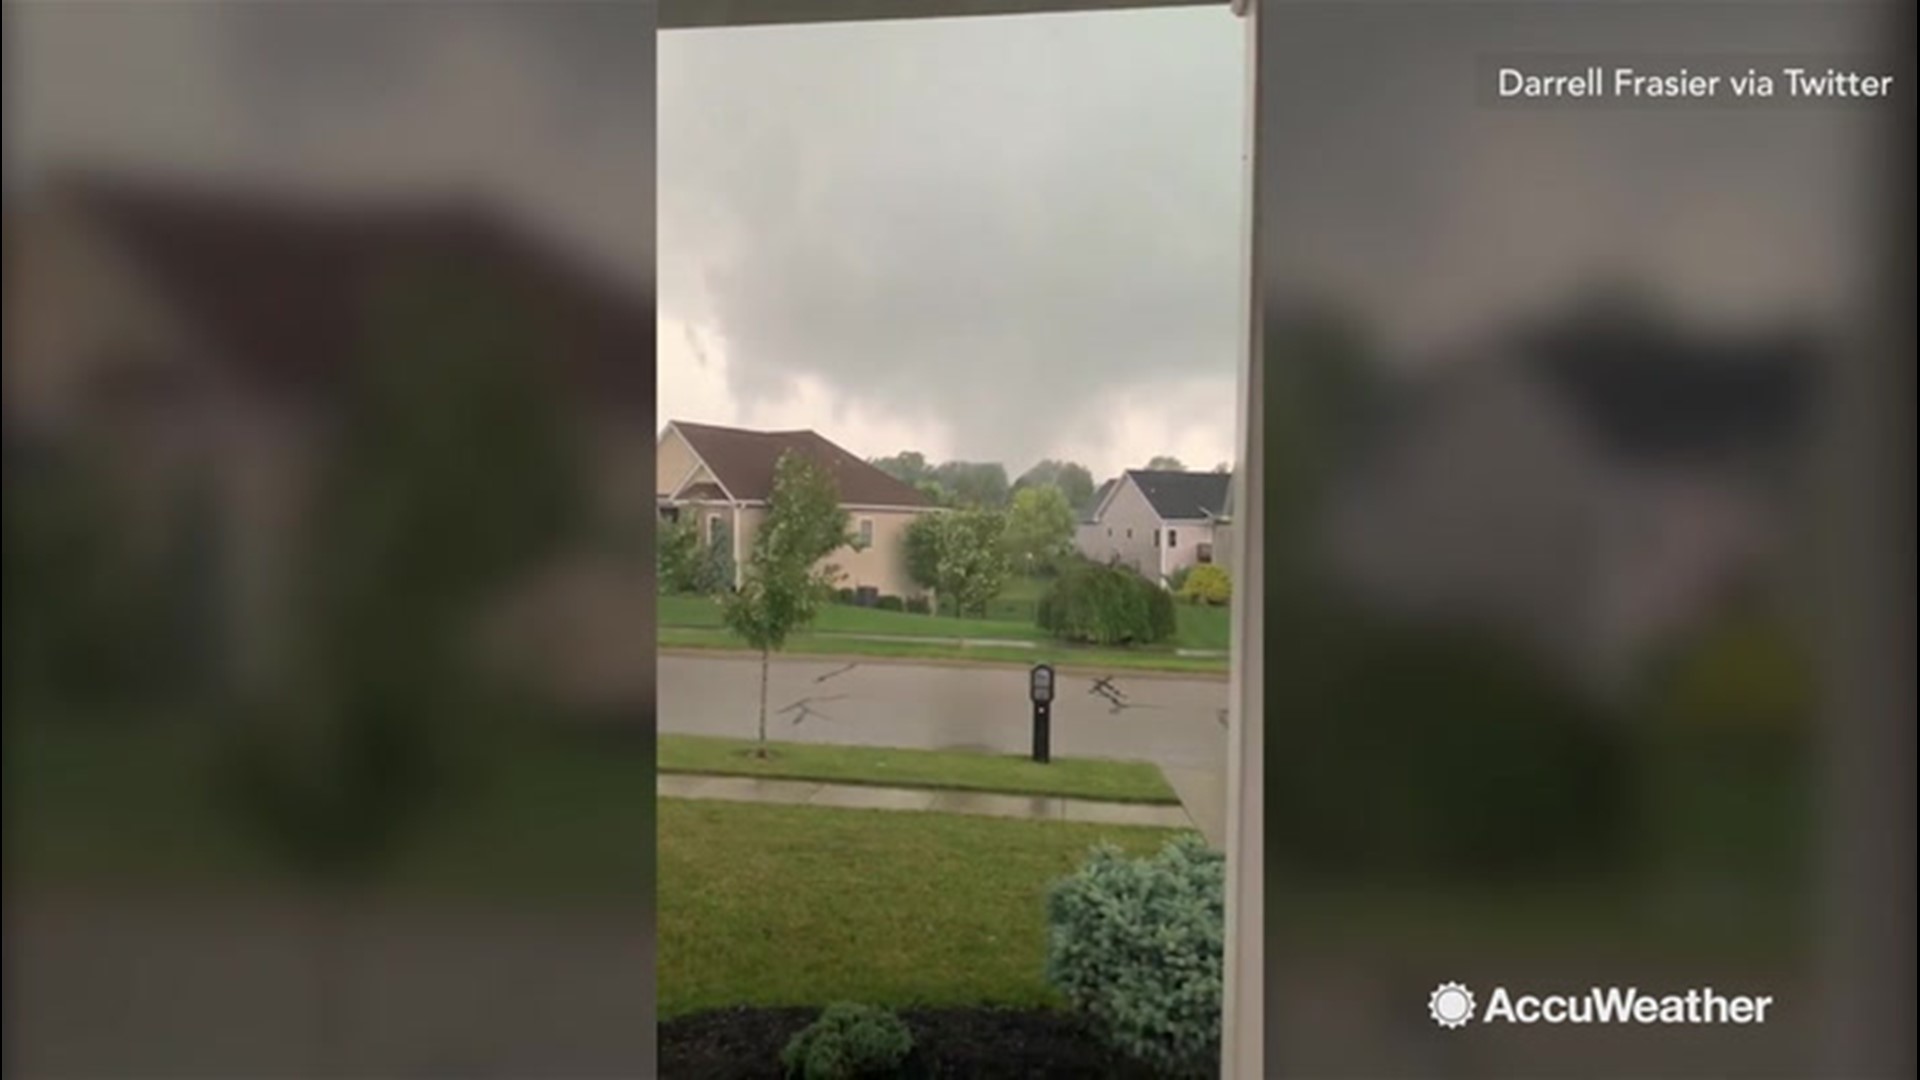 Residents of Ellettsville, Indiana, got a scare on June, 15, when a tornado touched down among their neighborhood. The tornado tore through houses, and damaged much of the western part of the town.